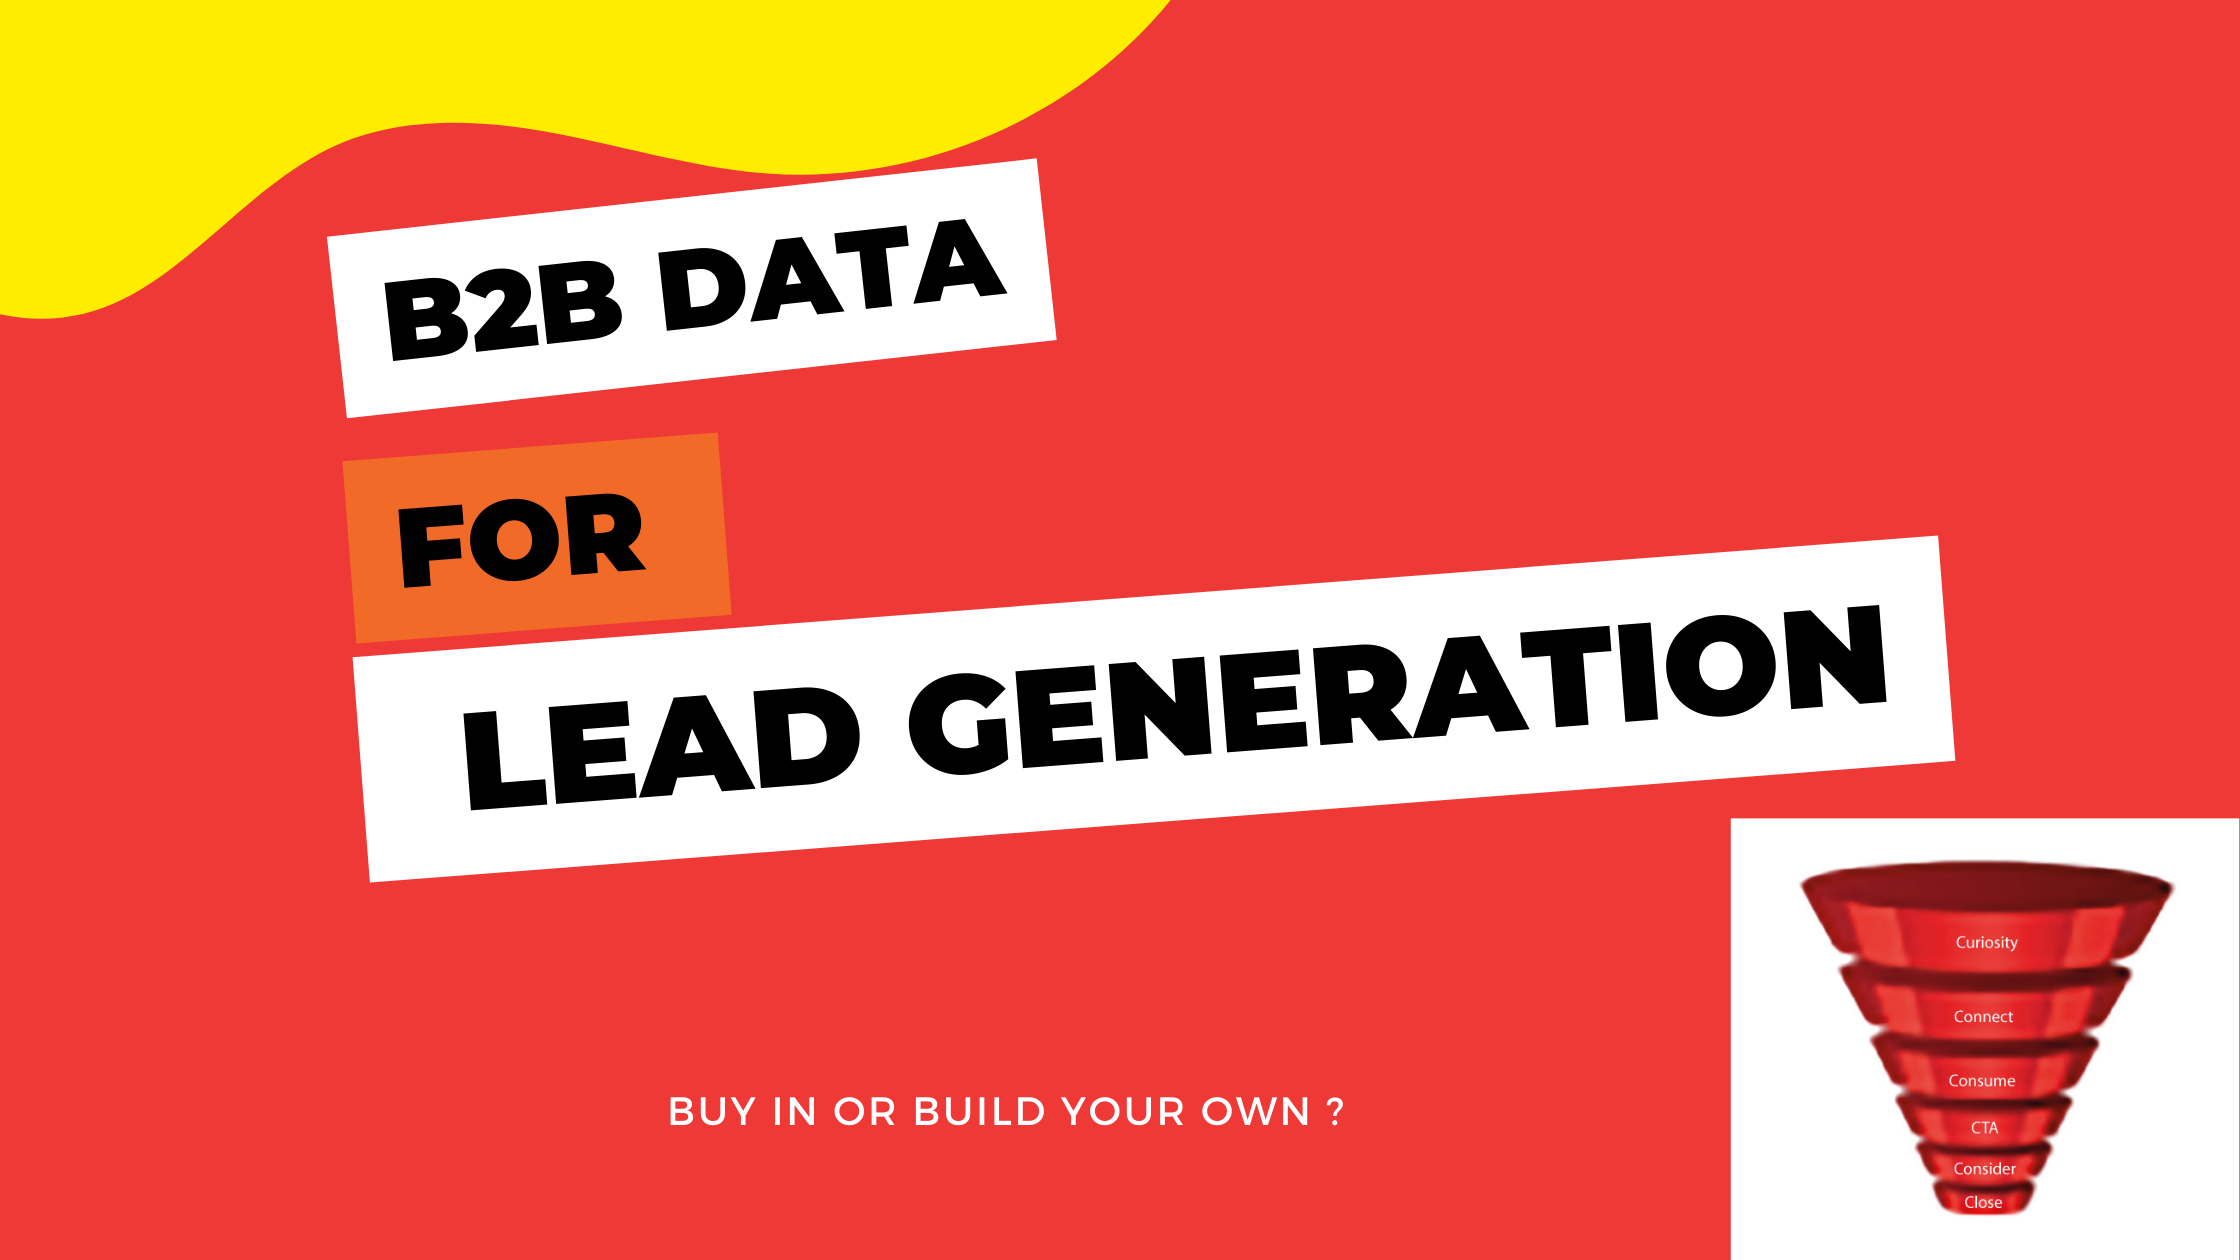 B2B data for lead generation. To buy or build your own.